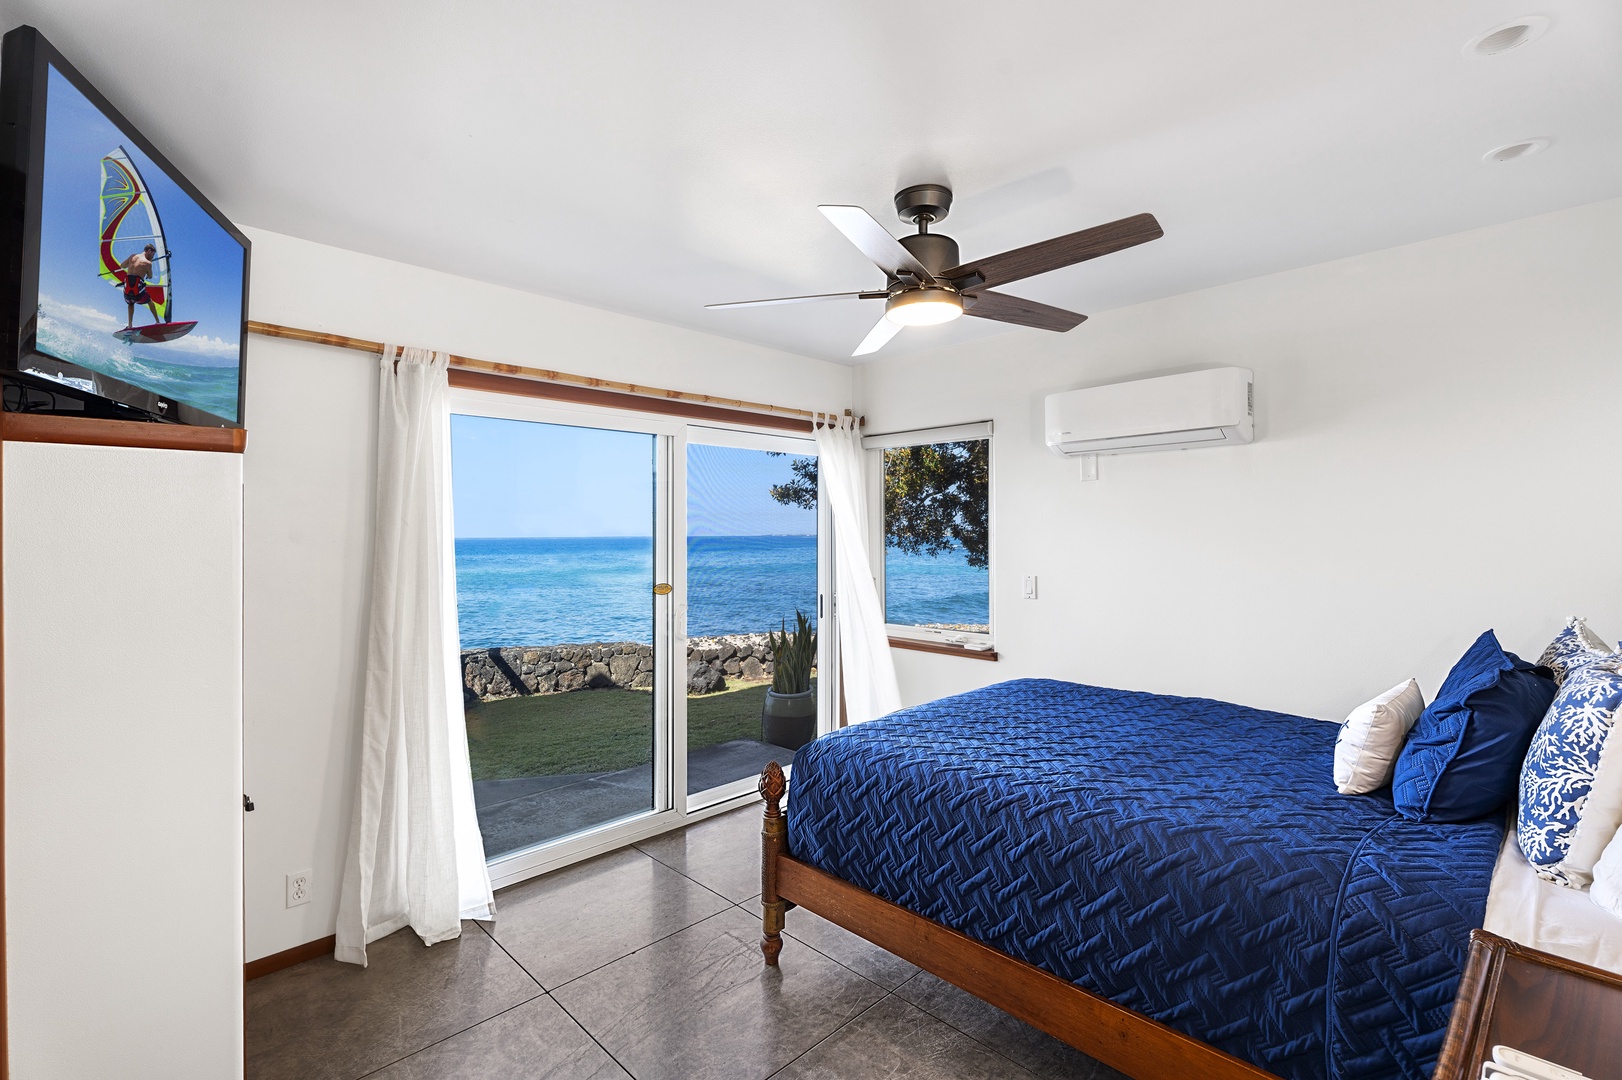 Kailua-Kona Vacation Rentals, Hale Kope Kai - Downstairs guest bedroom equipped with Queen bed, A/C, Lanai, and ensuite